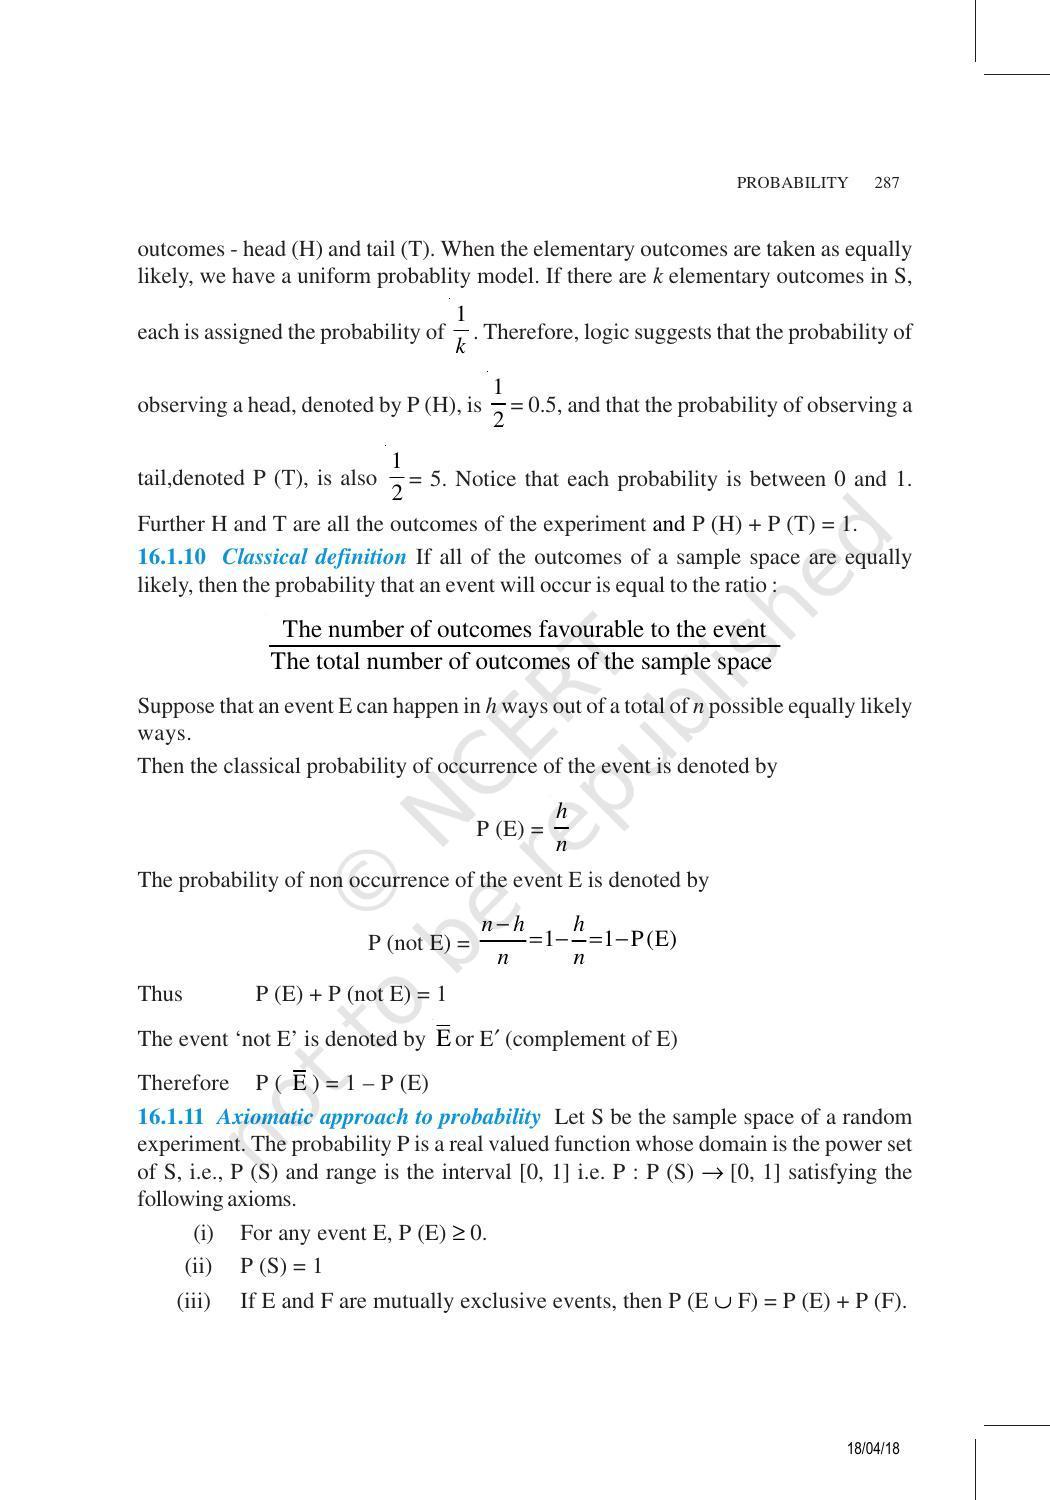 NCERT Exemplar Book for Class 11 Maths: Chapter 16 Probability - Page 4